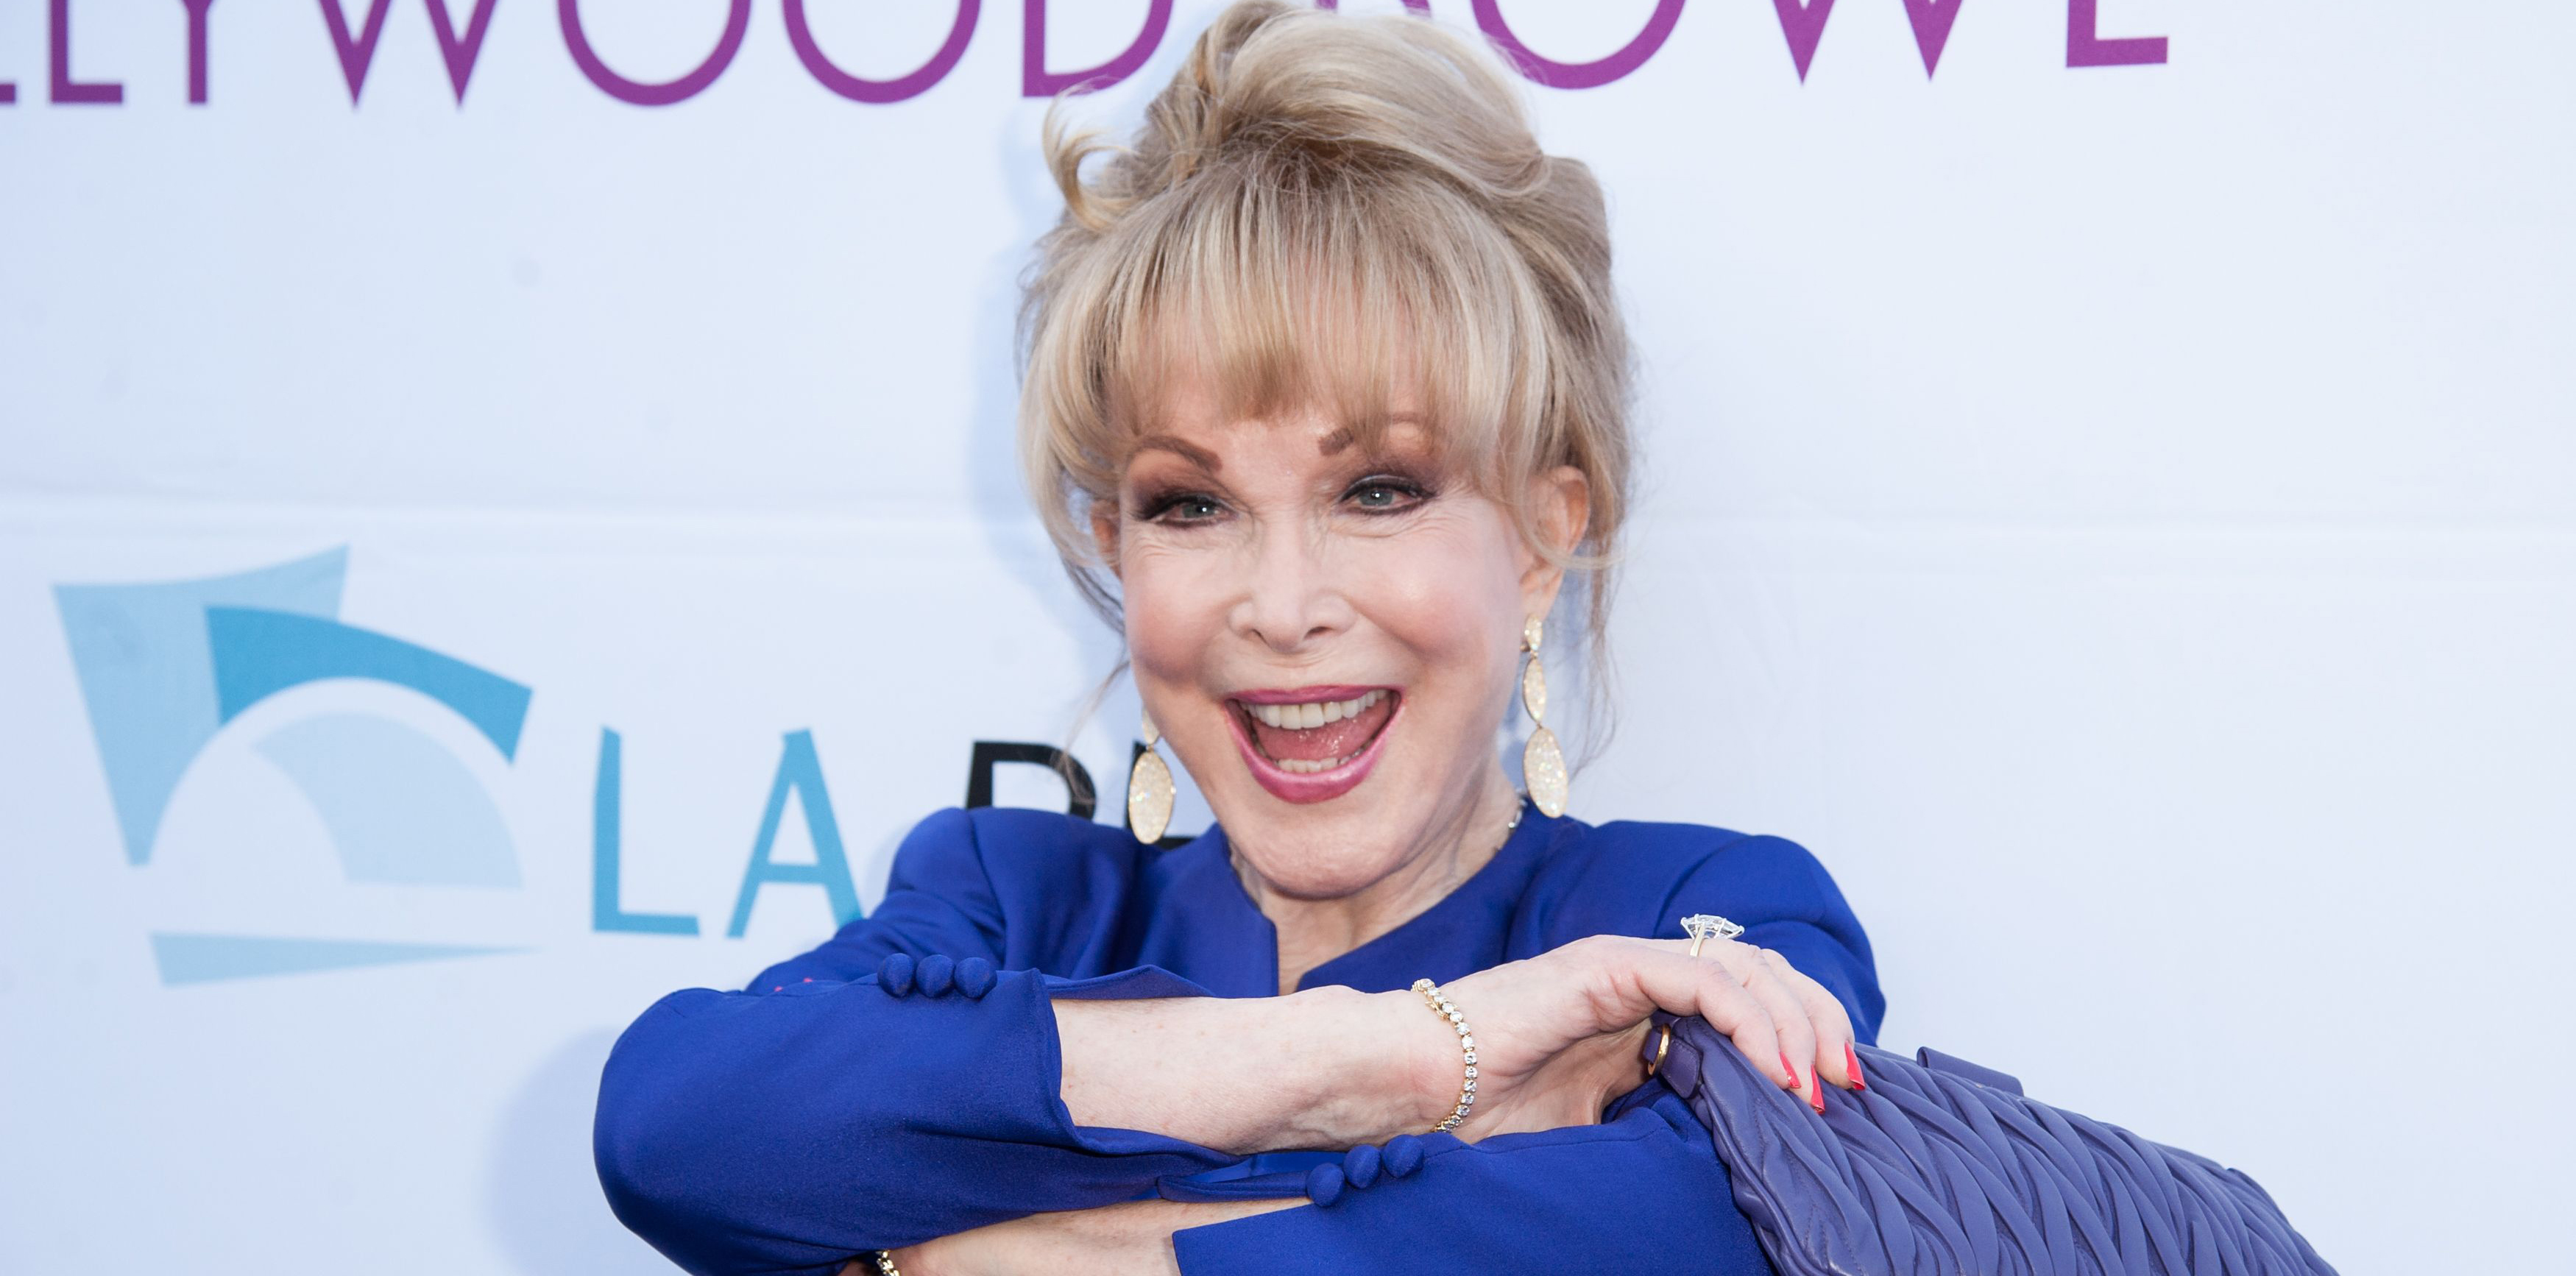 Beach Nudity Pageant - I Dream of Jeannie' Star Barbara Eden: A Look Back at Her Life